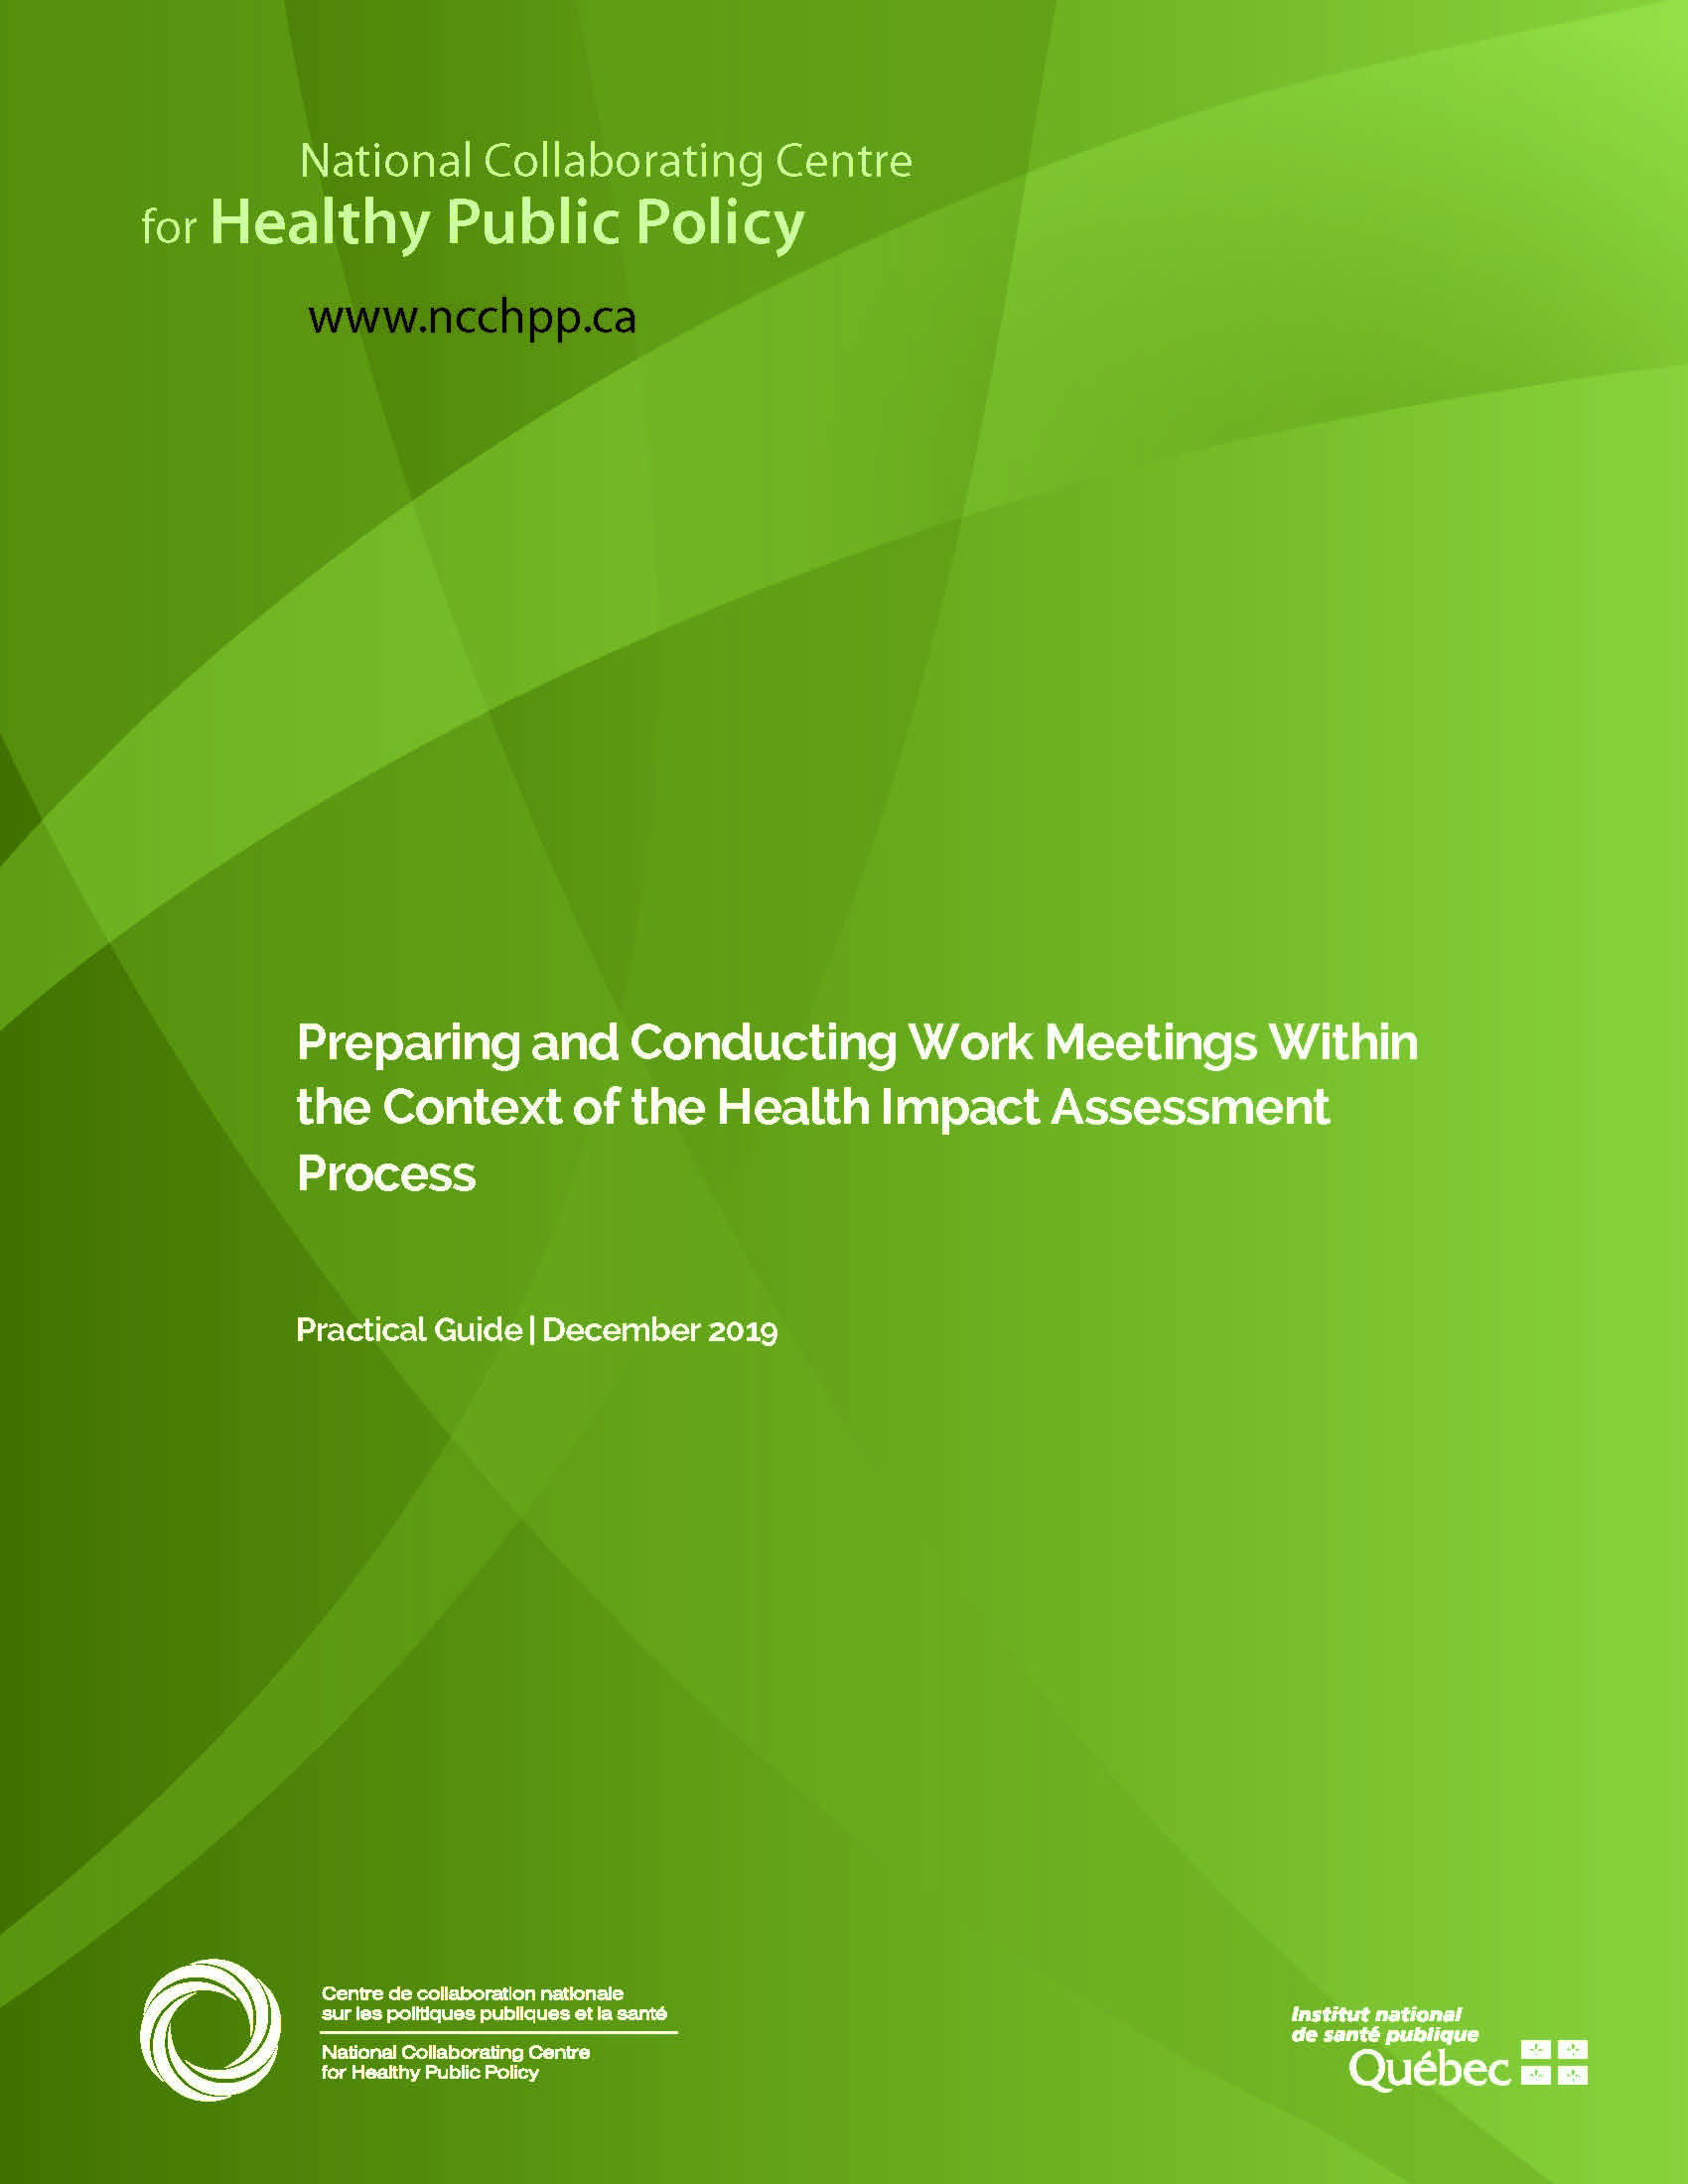 Preparing and Conducting Work Meetings Within the Context of the Health Impact Assessment Process